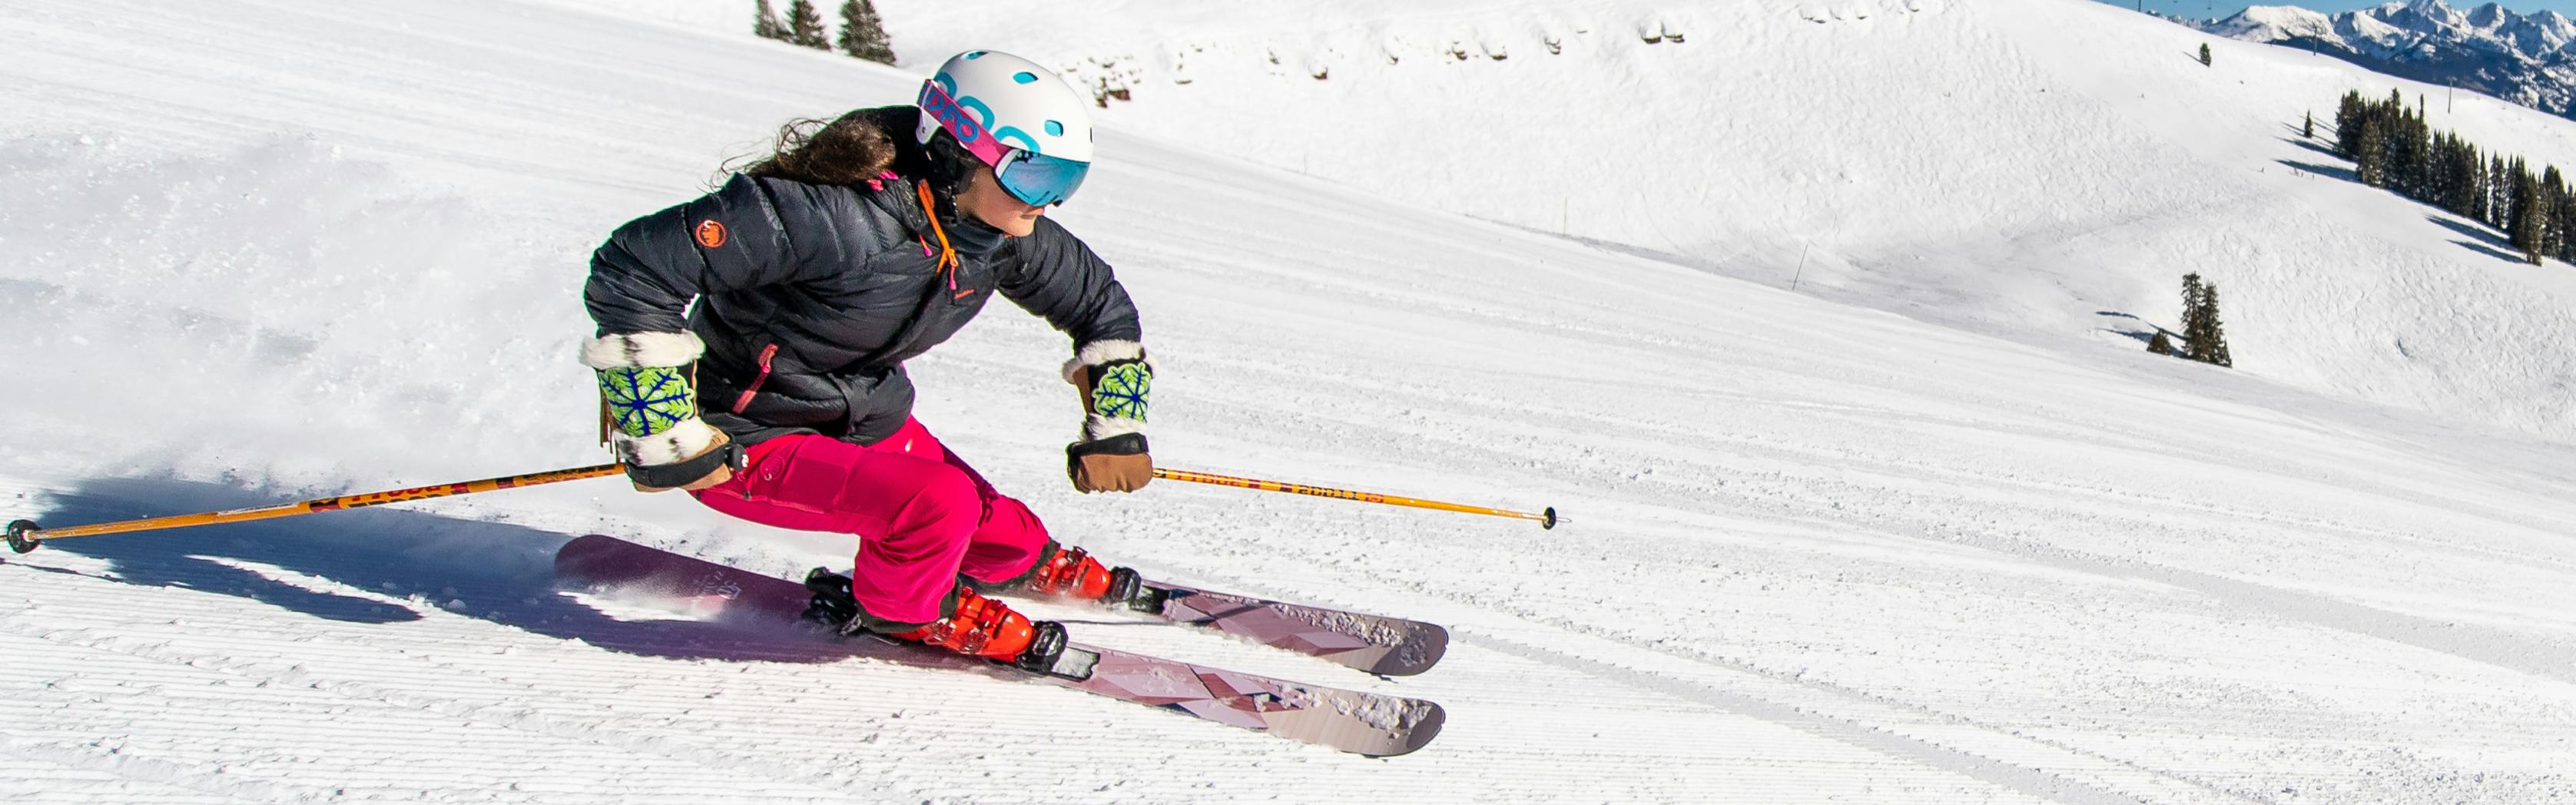 A woman in hot pink ski pants and a black jacket on purple skis and with orange poles skiing down a groomer slope.